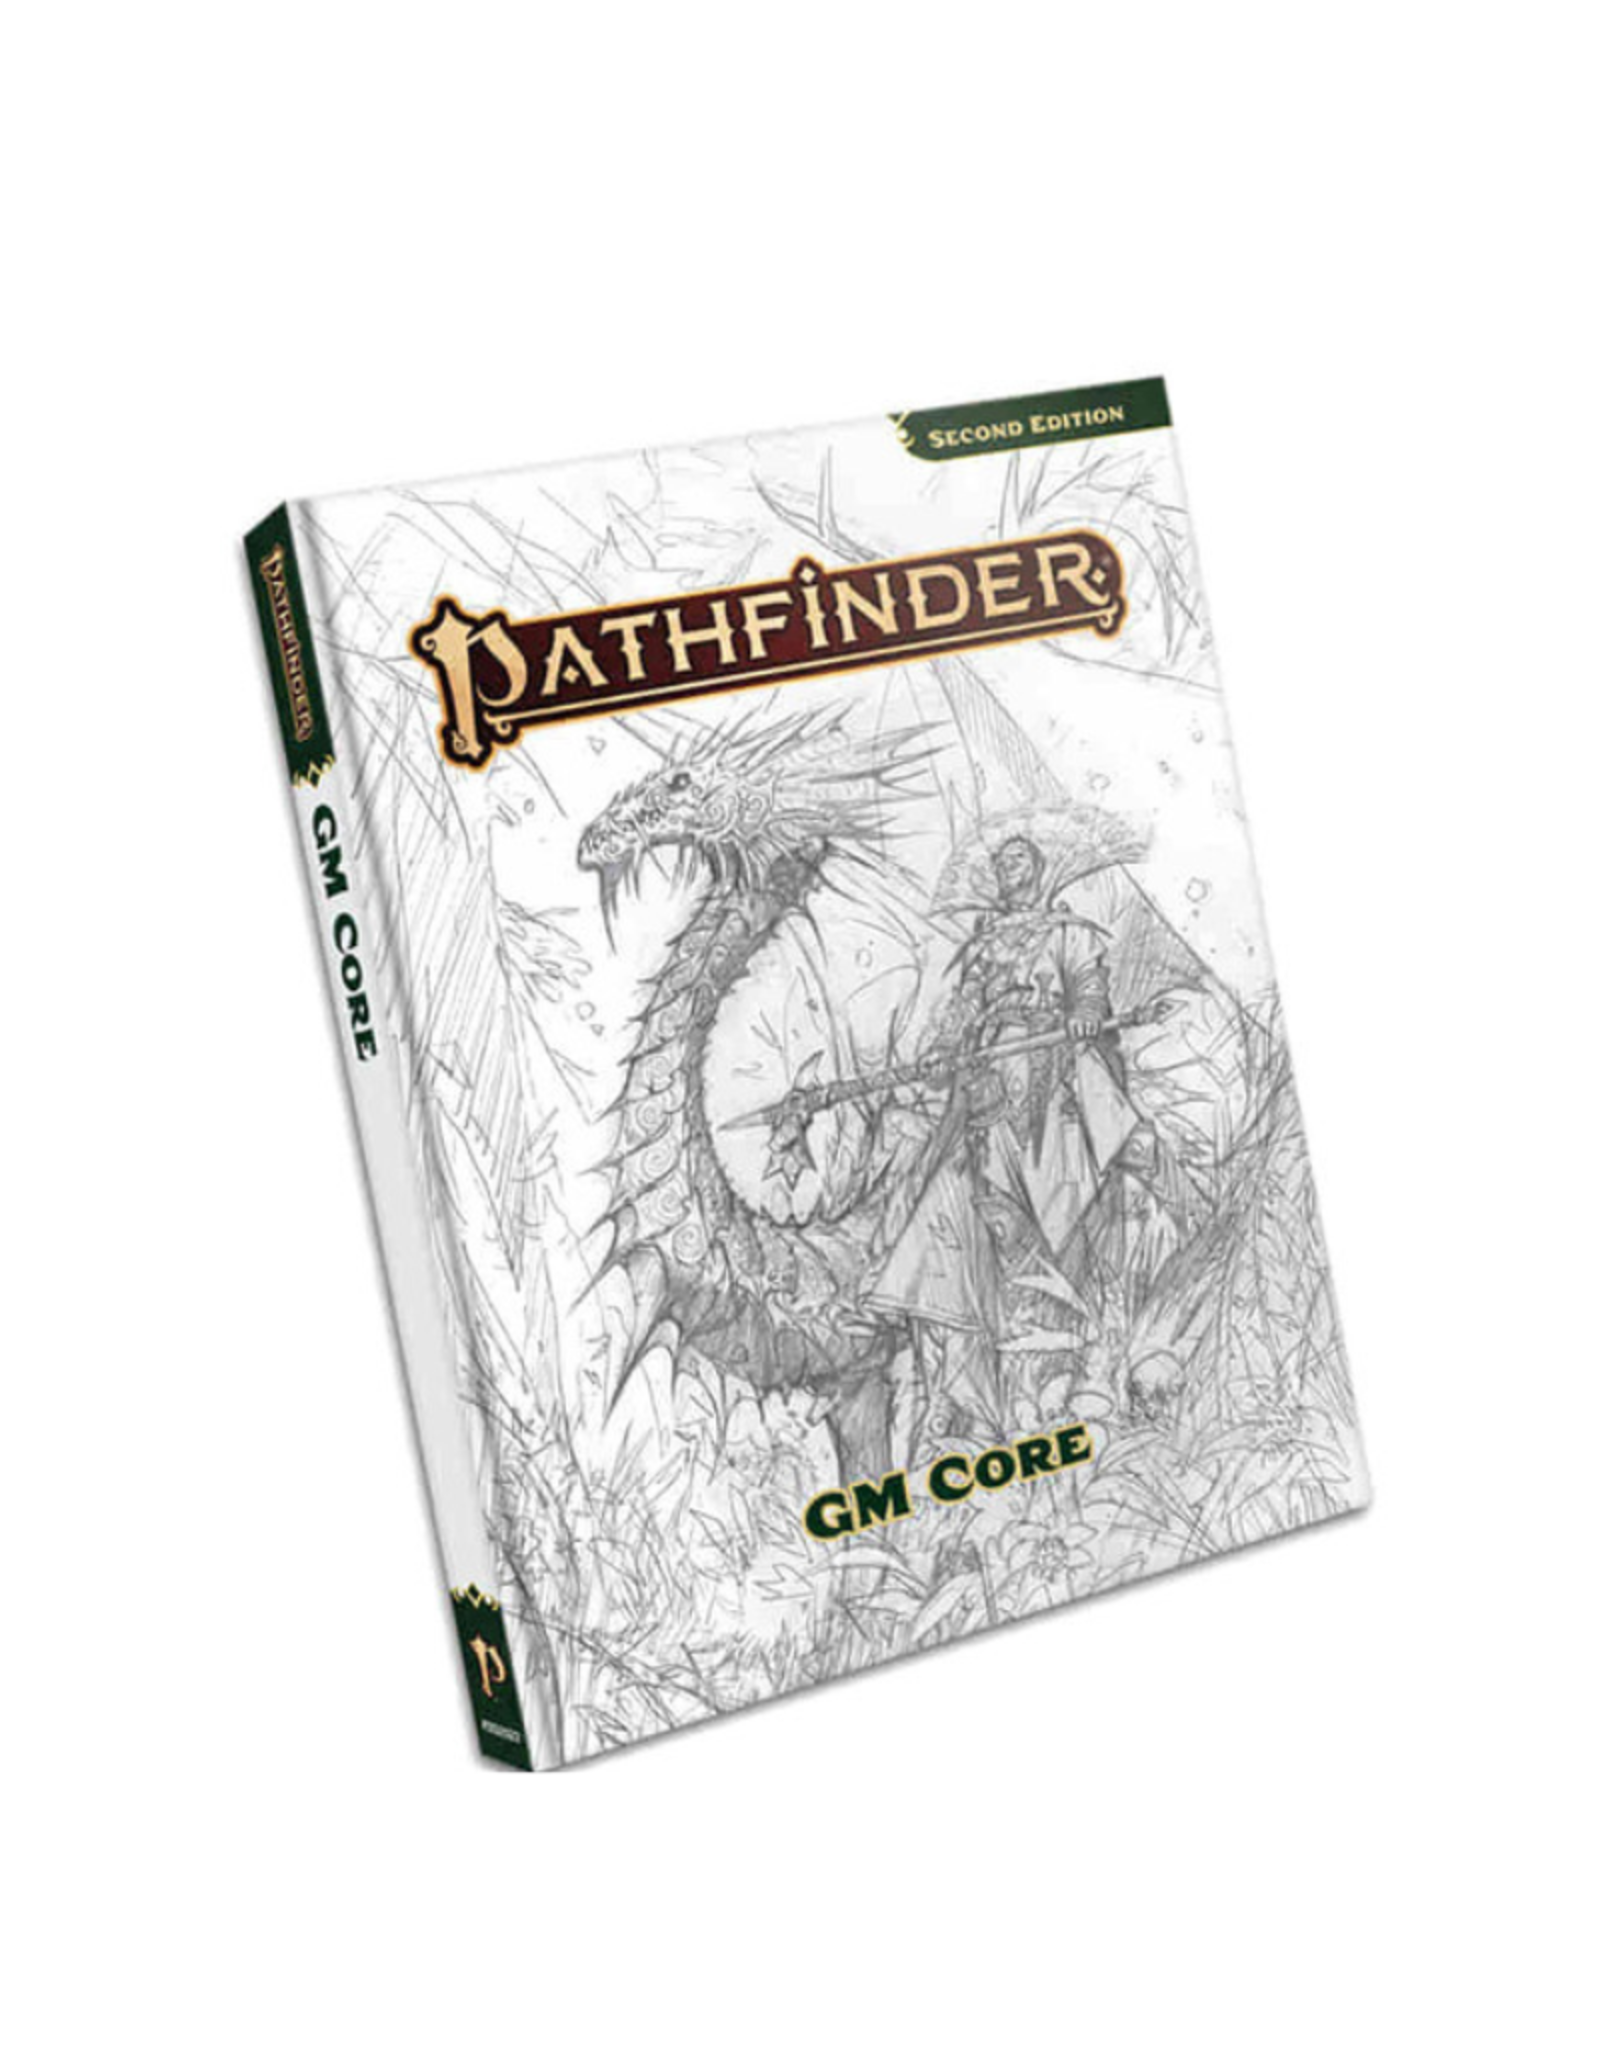 Pathfinder 2nd Edition: GM Core Remastered - Sketch Cover